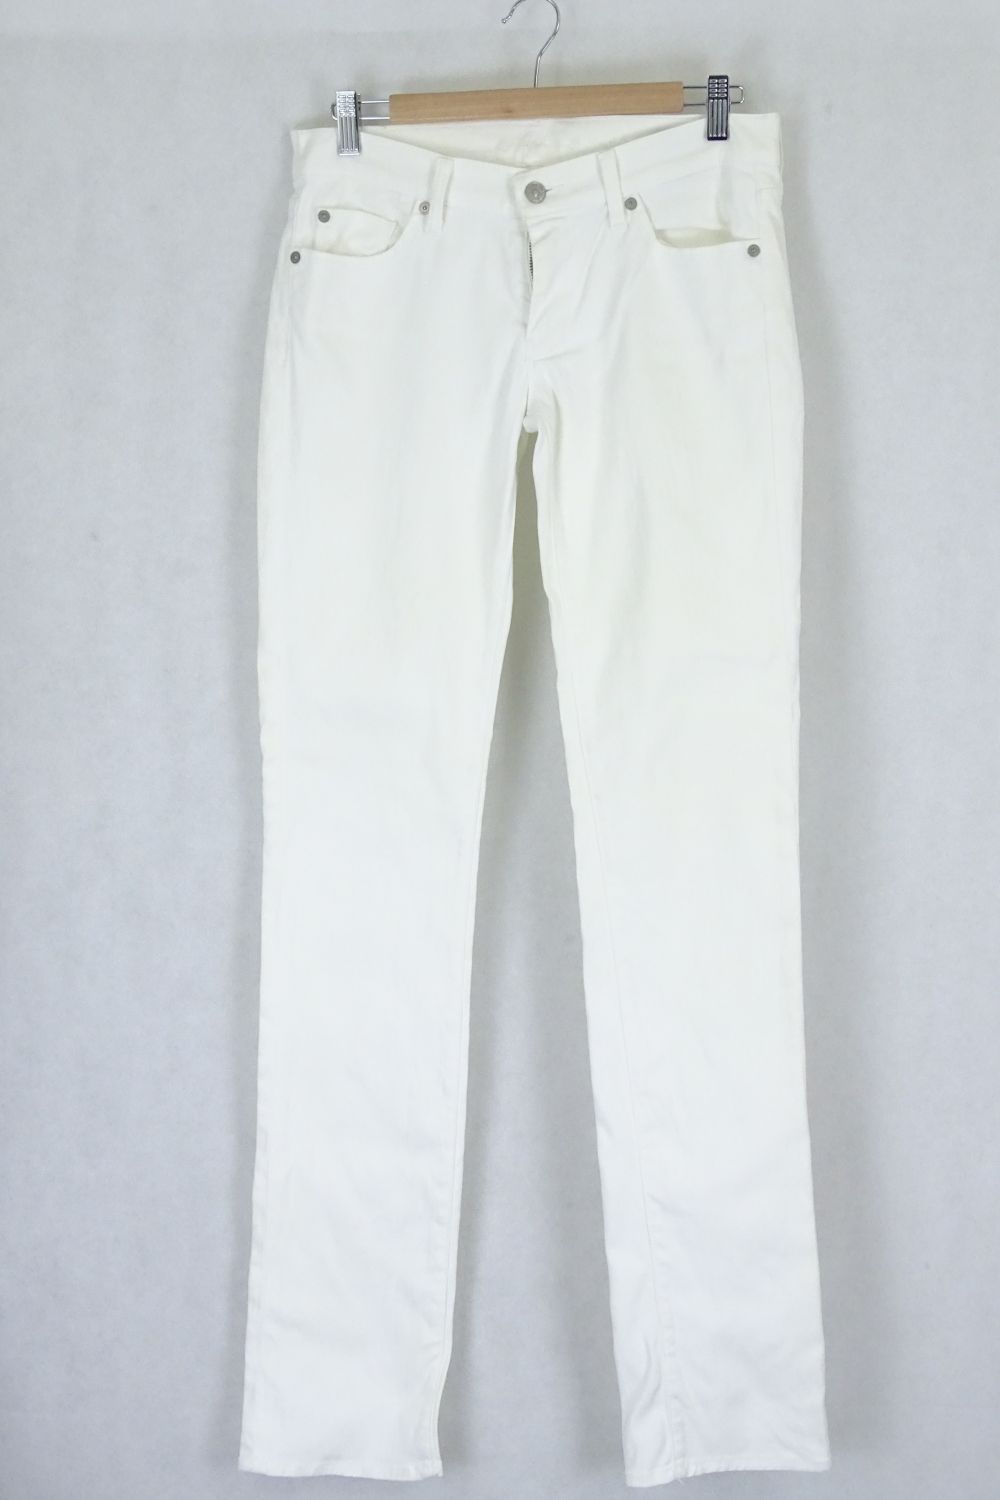 7 For All Mankind White Jeans 27